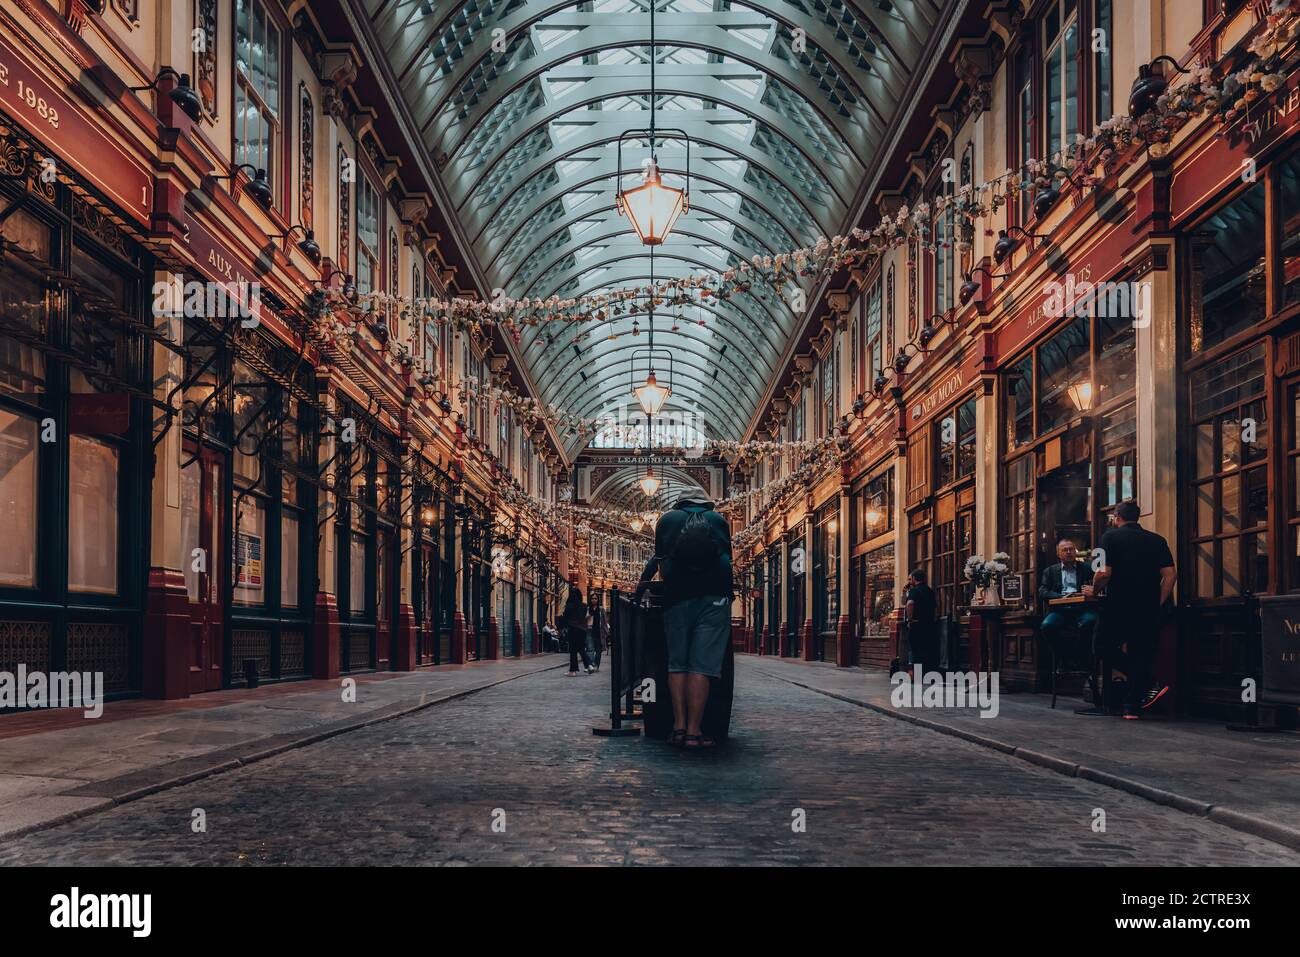 London, UK - August 24th, 2020: Rear view of a man standing alone at a New Moon pub table at the arcade of Leadenhall Market, popular market in London Stock Photo